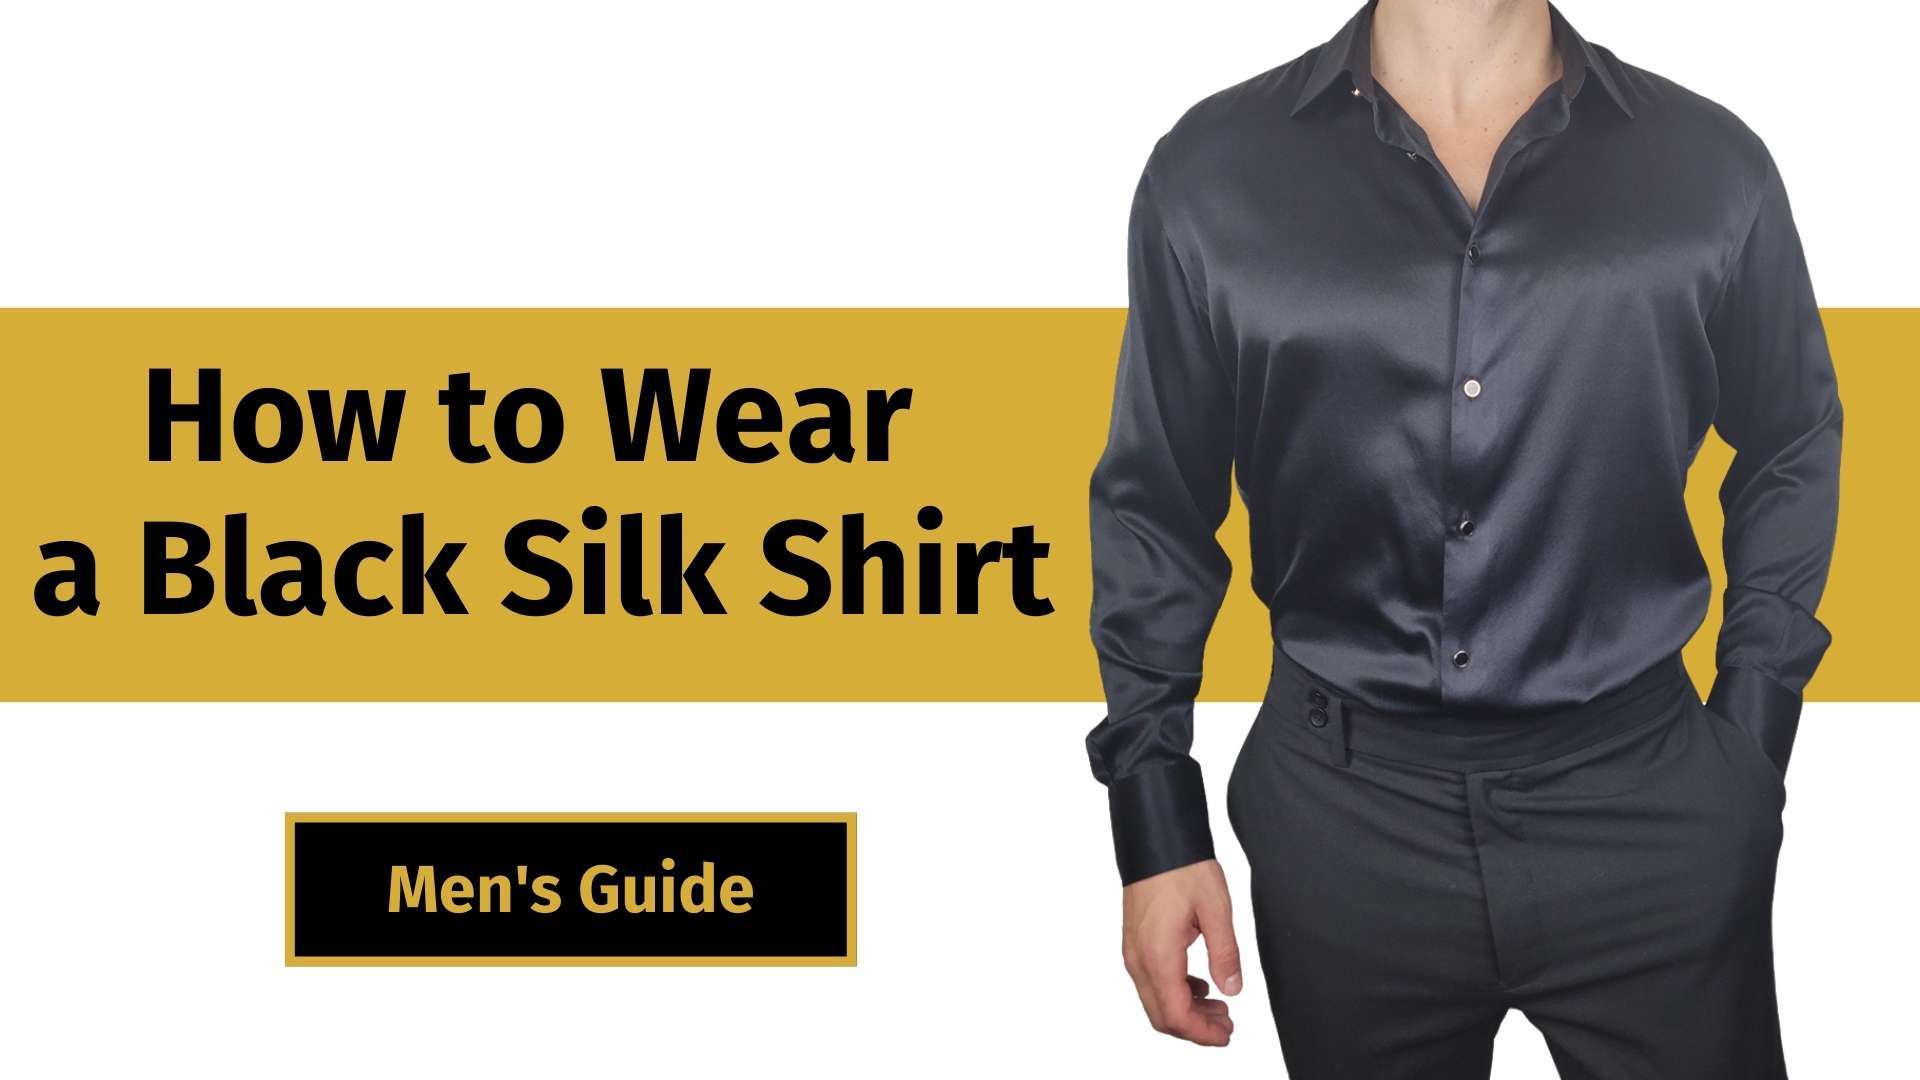 how to wear a black silk shirt banner image with a male model wearing a black silk shirt